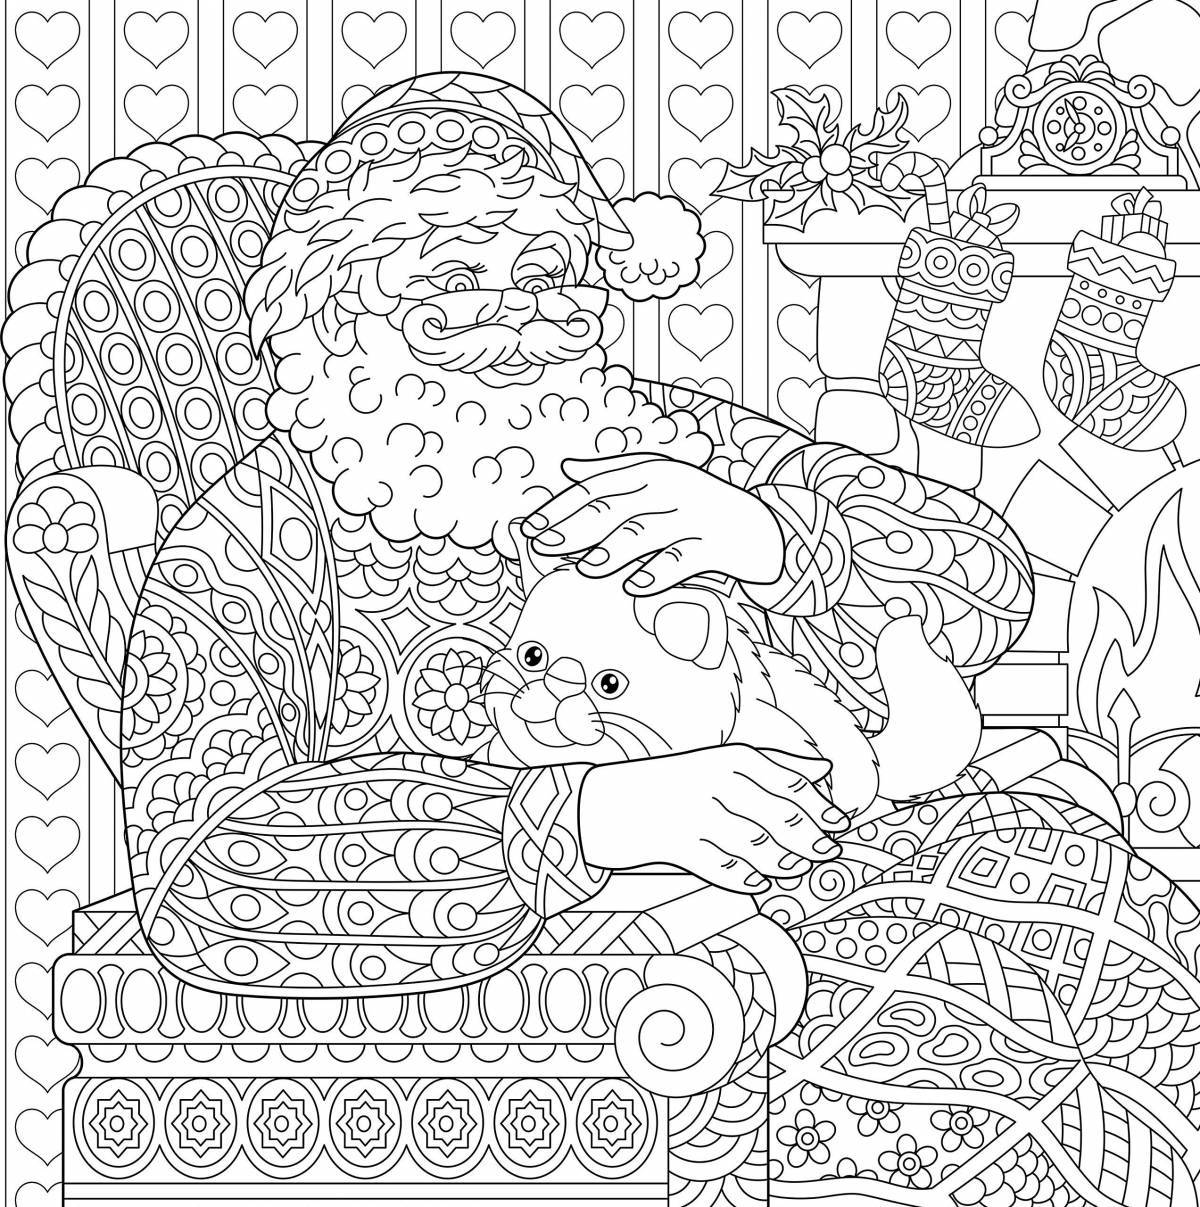 Live Christmas complex coloring